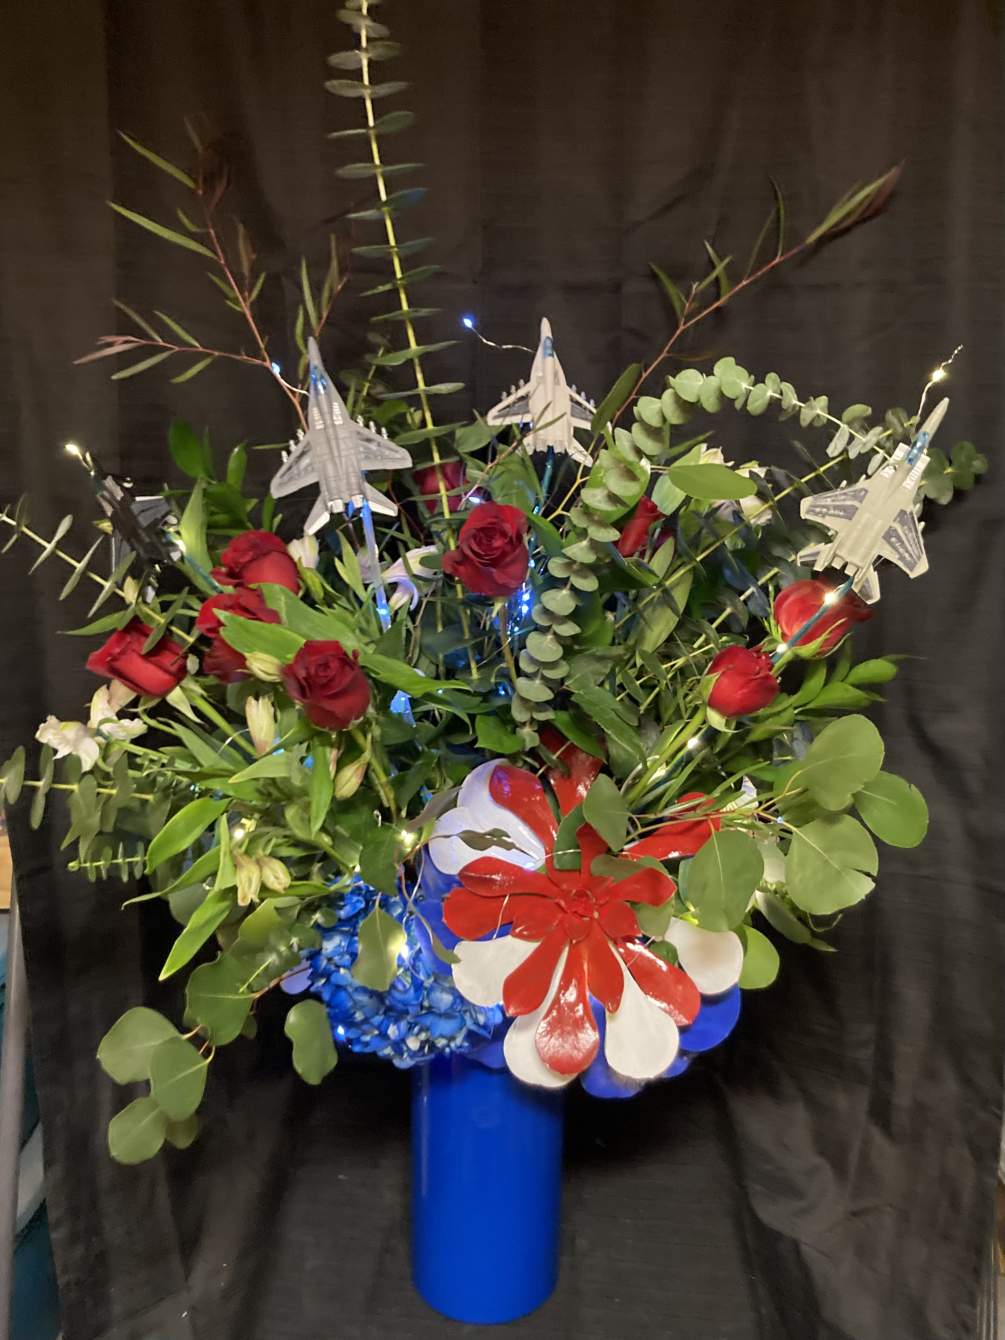 Red white and blue flowers arranged in a custom vase.